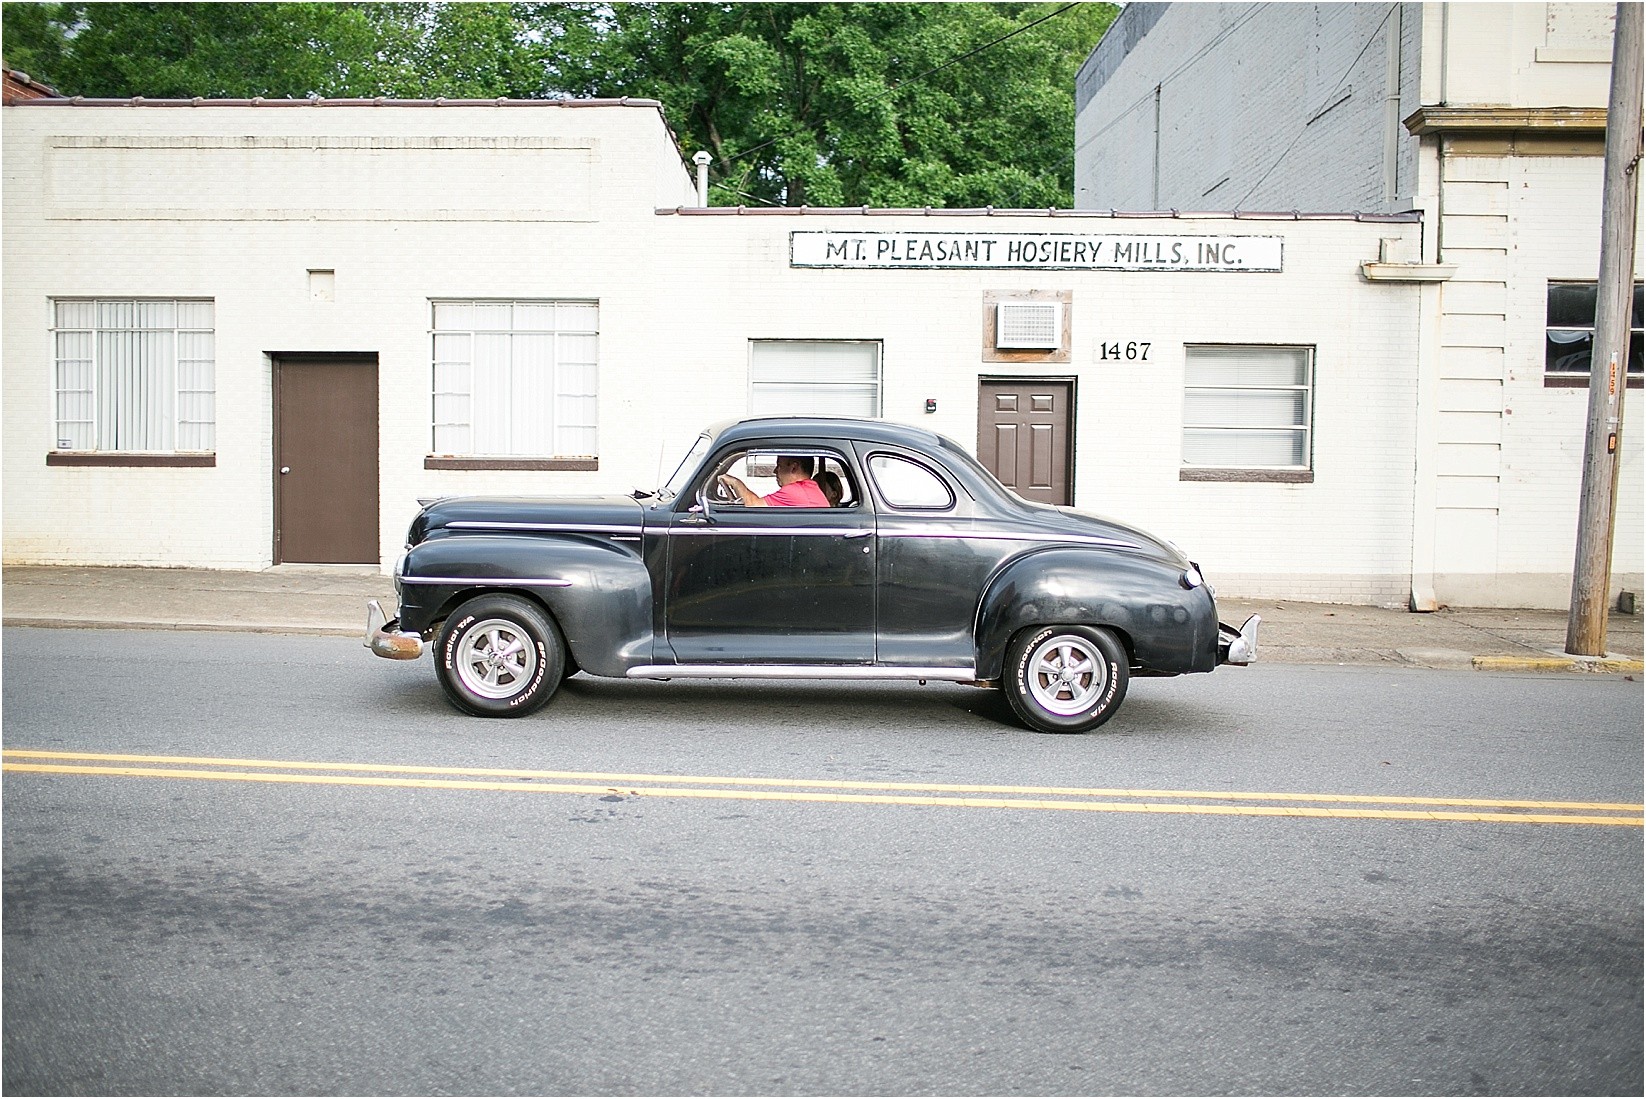 vintage car driving during Andria & Matts Mount Pleasant engagement session in downtown mount pleasant nc